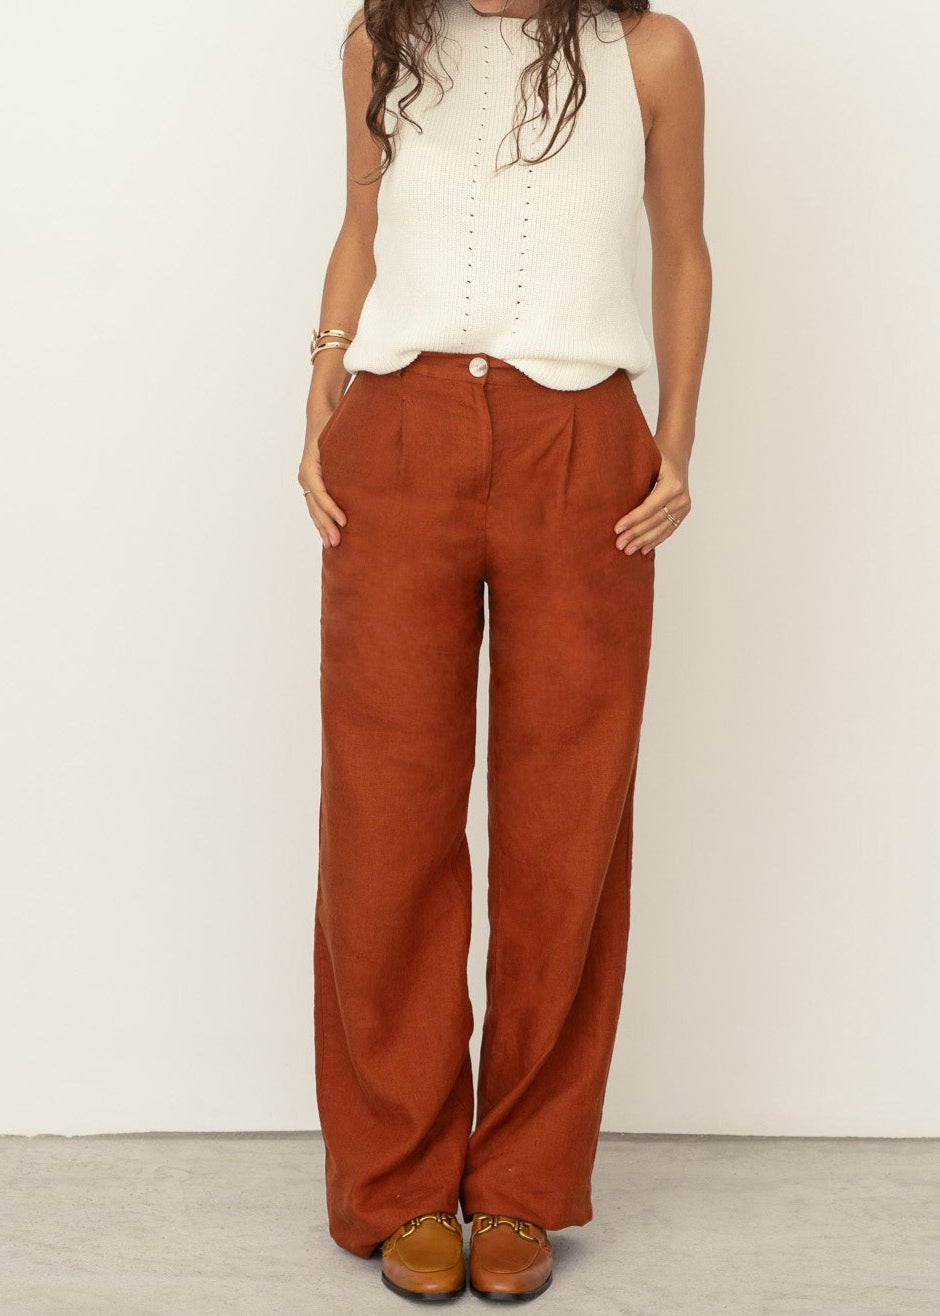 Naz women's linen trousers for summer. High-waisted fit and wide leg.